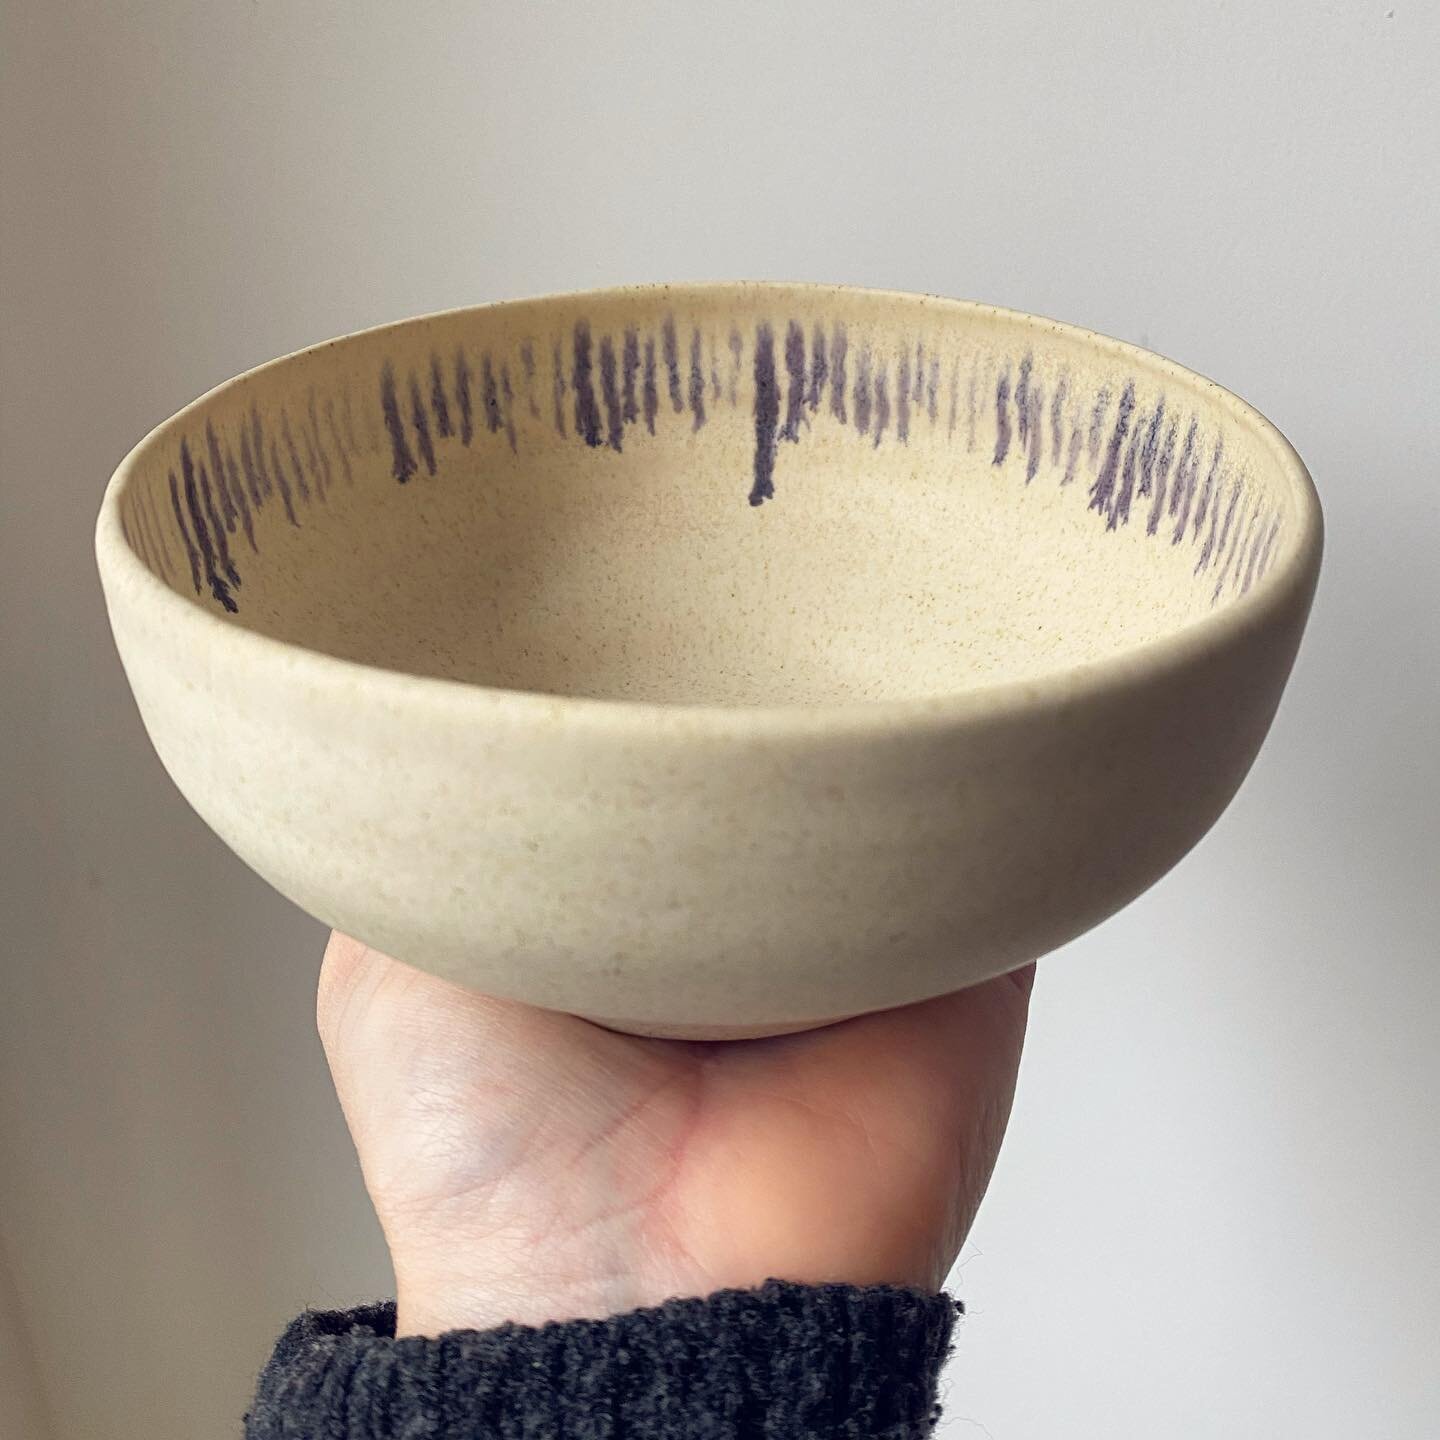 A one-off bowl experiment